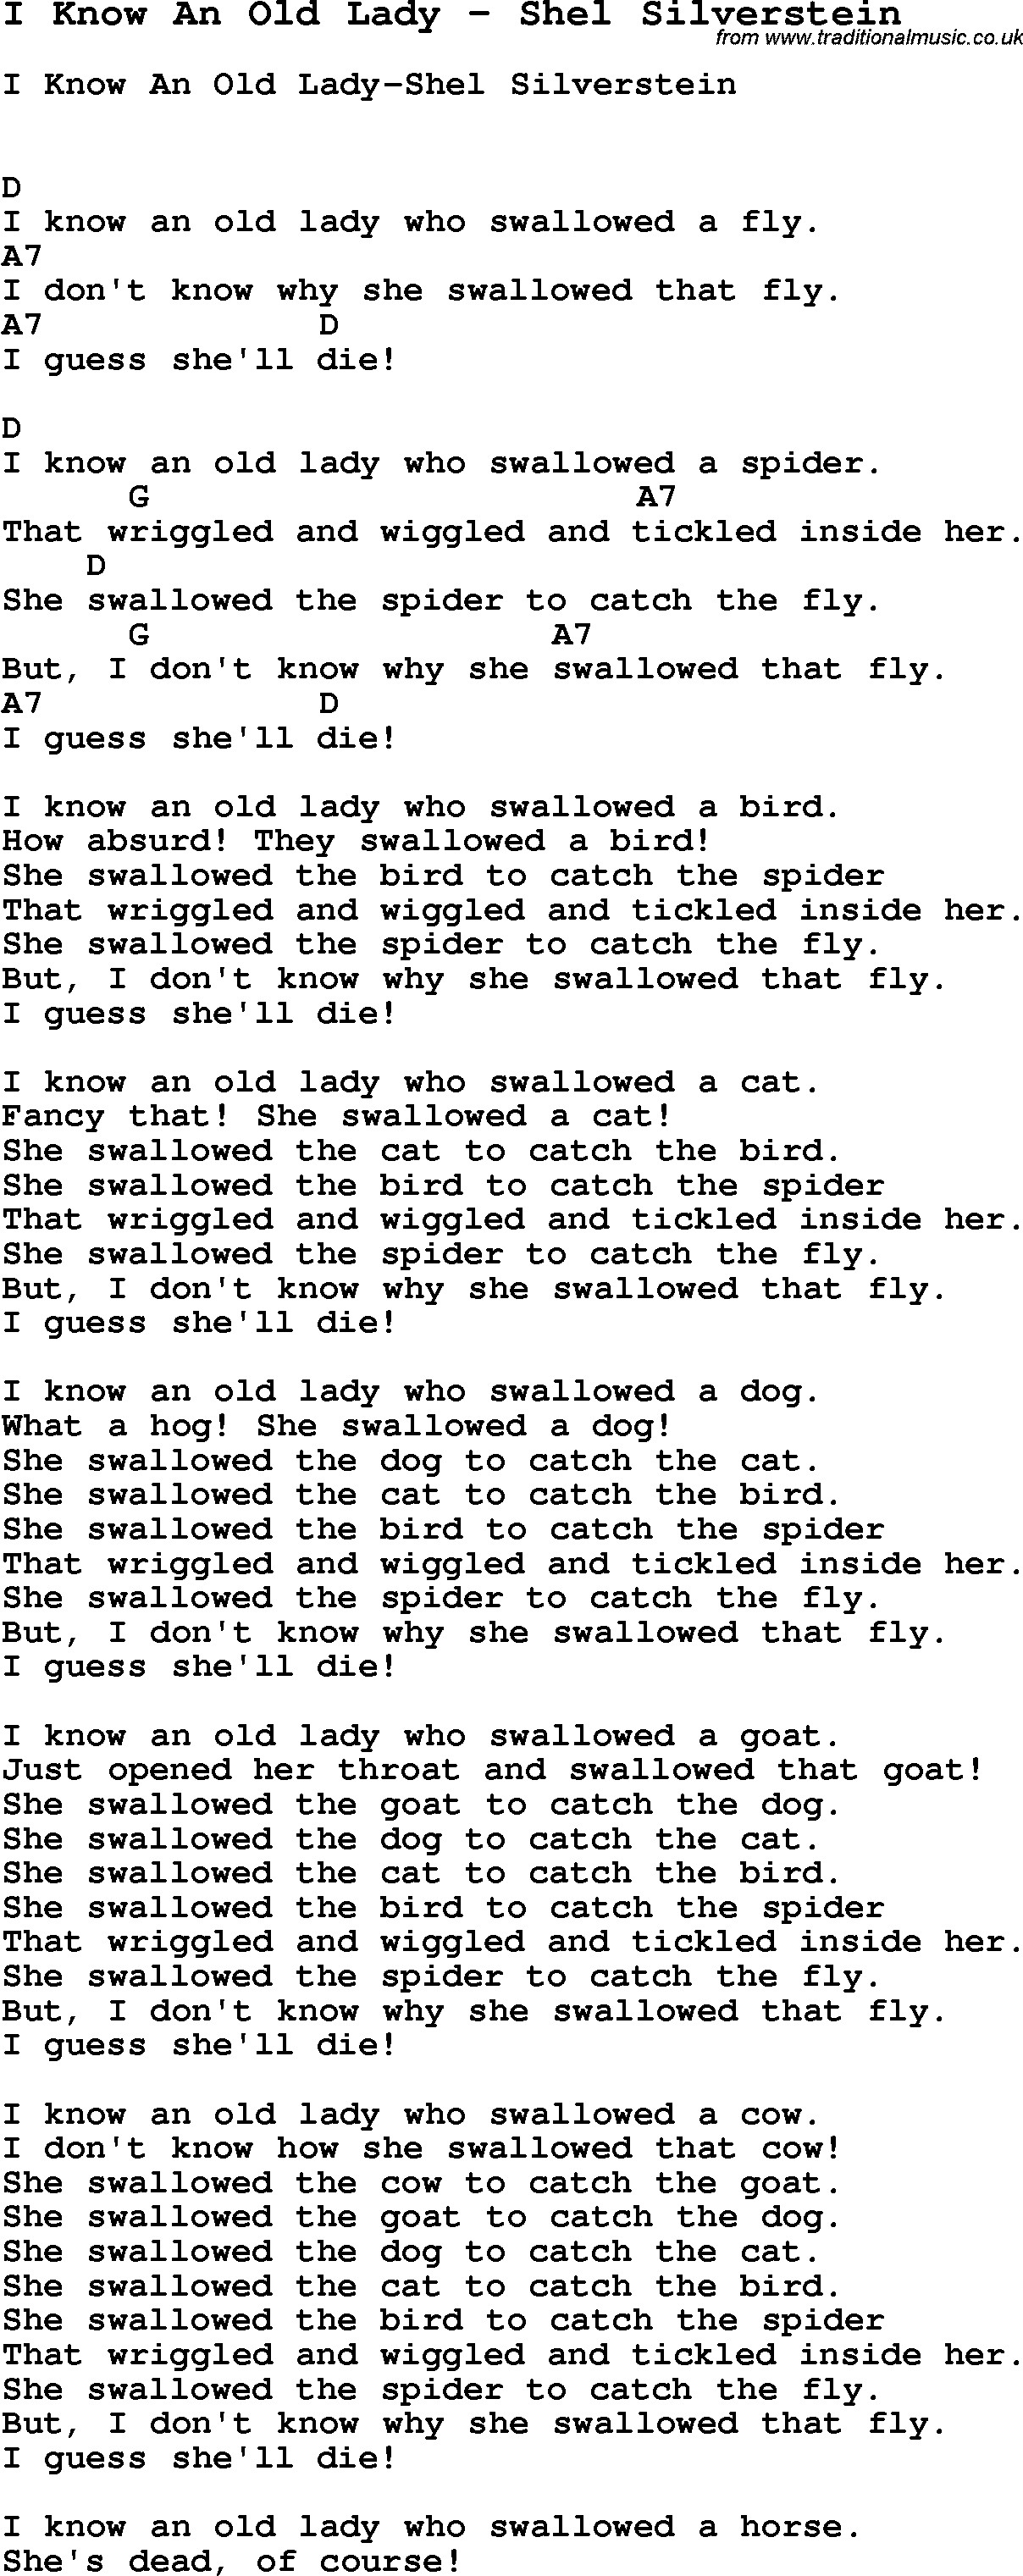 Song I Know An Old Lady by Shel Silverstein, with lyrics for vocal performance and accompaniment chords for Ukulele, Guitar Banjo etc.